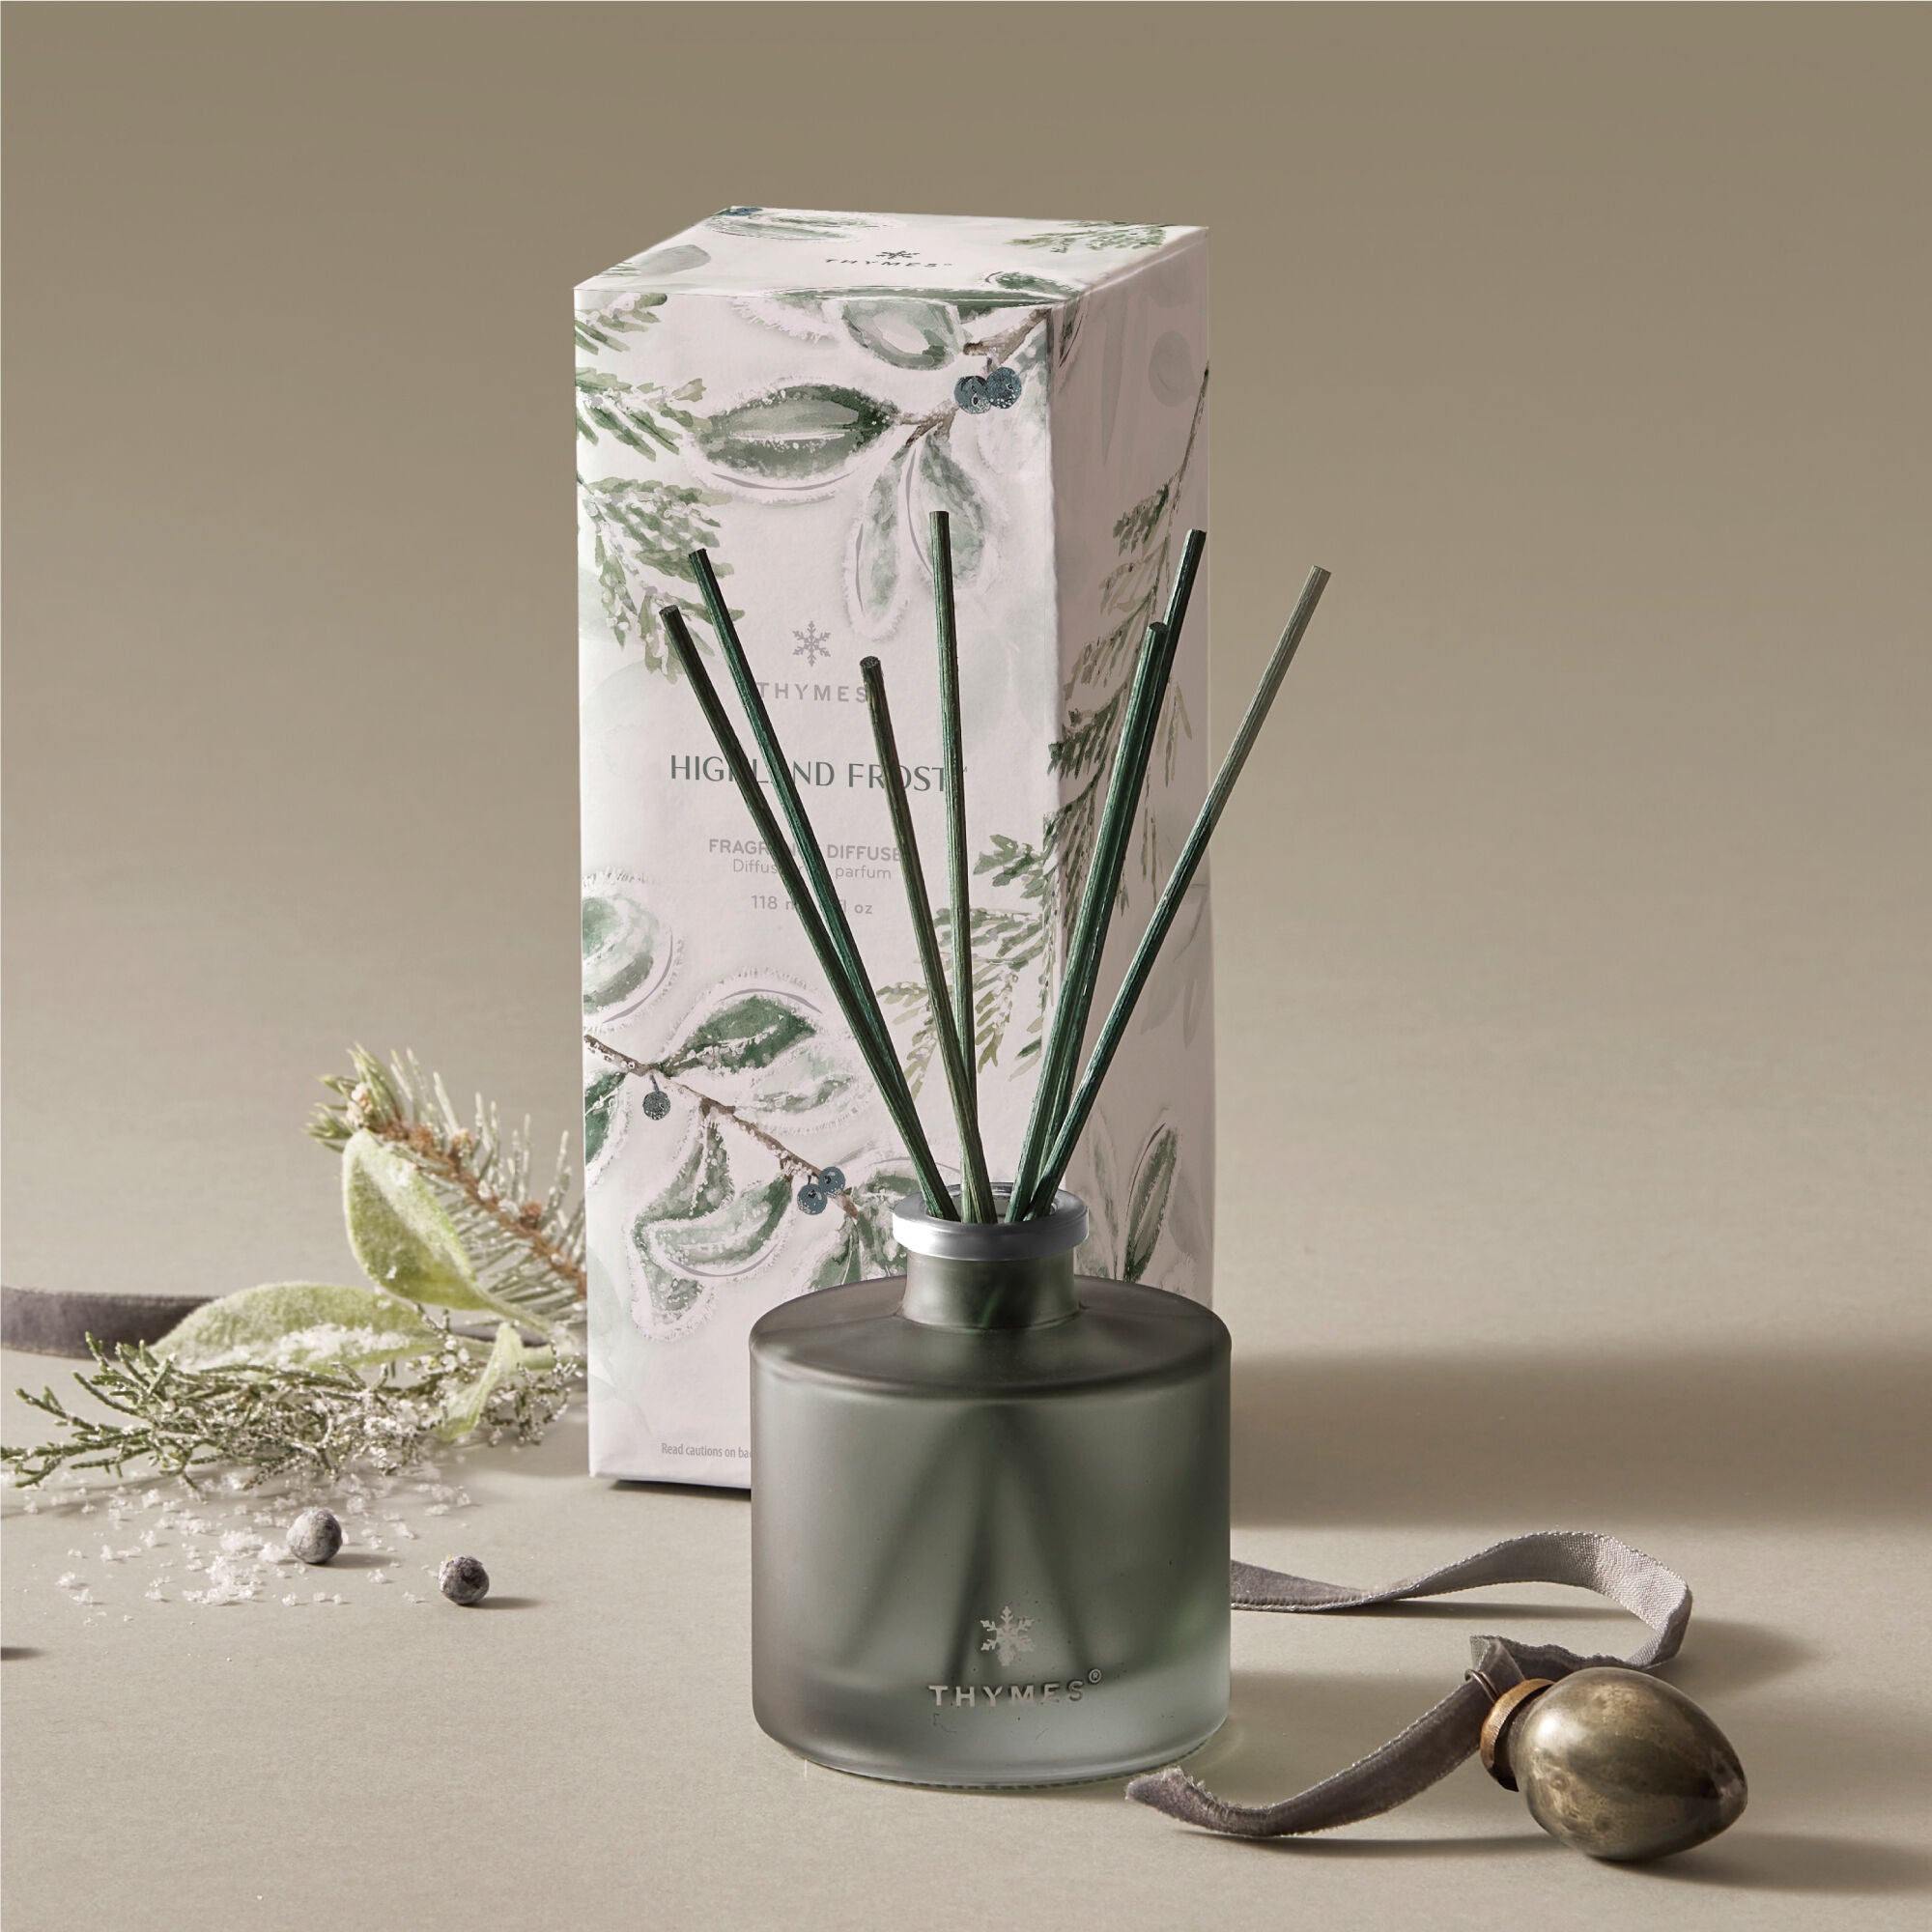 Thymes Highland Frost Petite Reed Diffuser